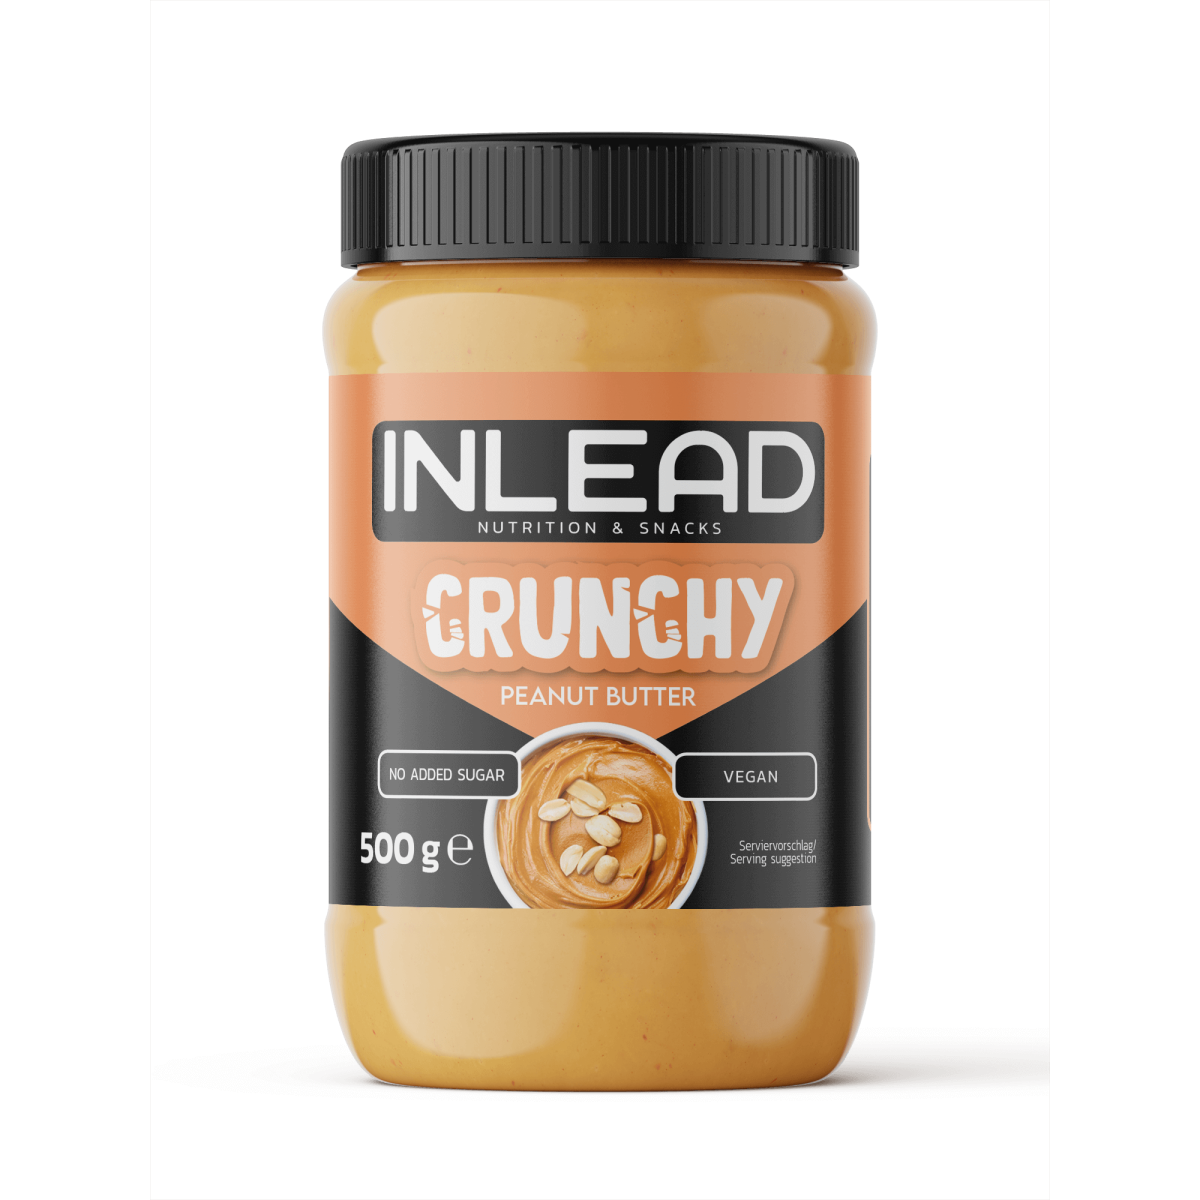 INLEAD - Peanut Butter Smooth - 500g